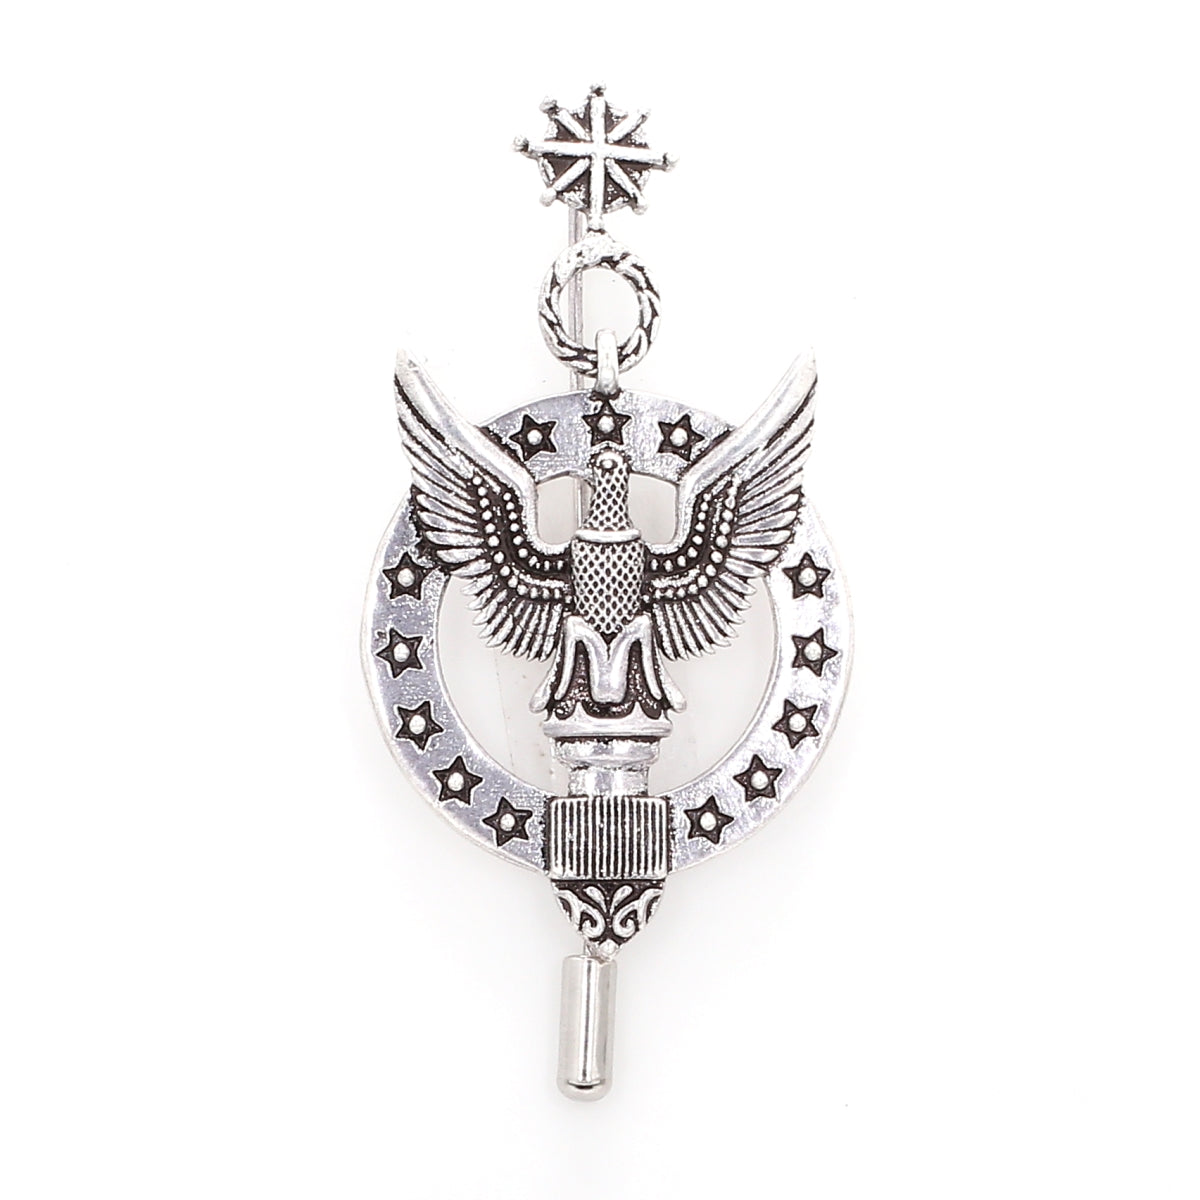 The Squadron Brooch